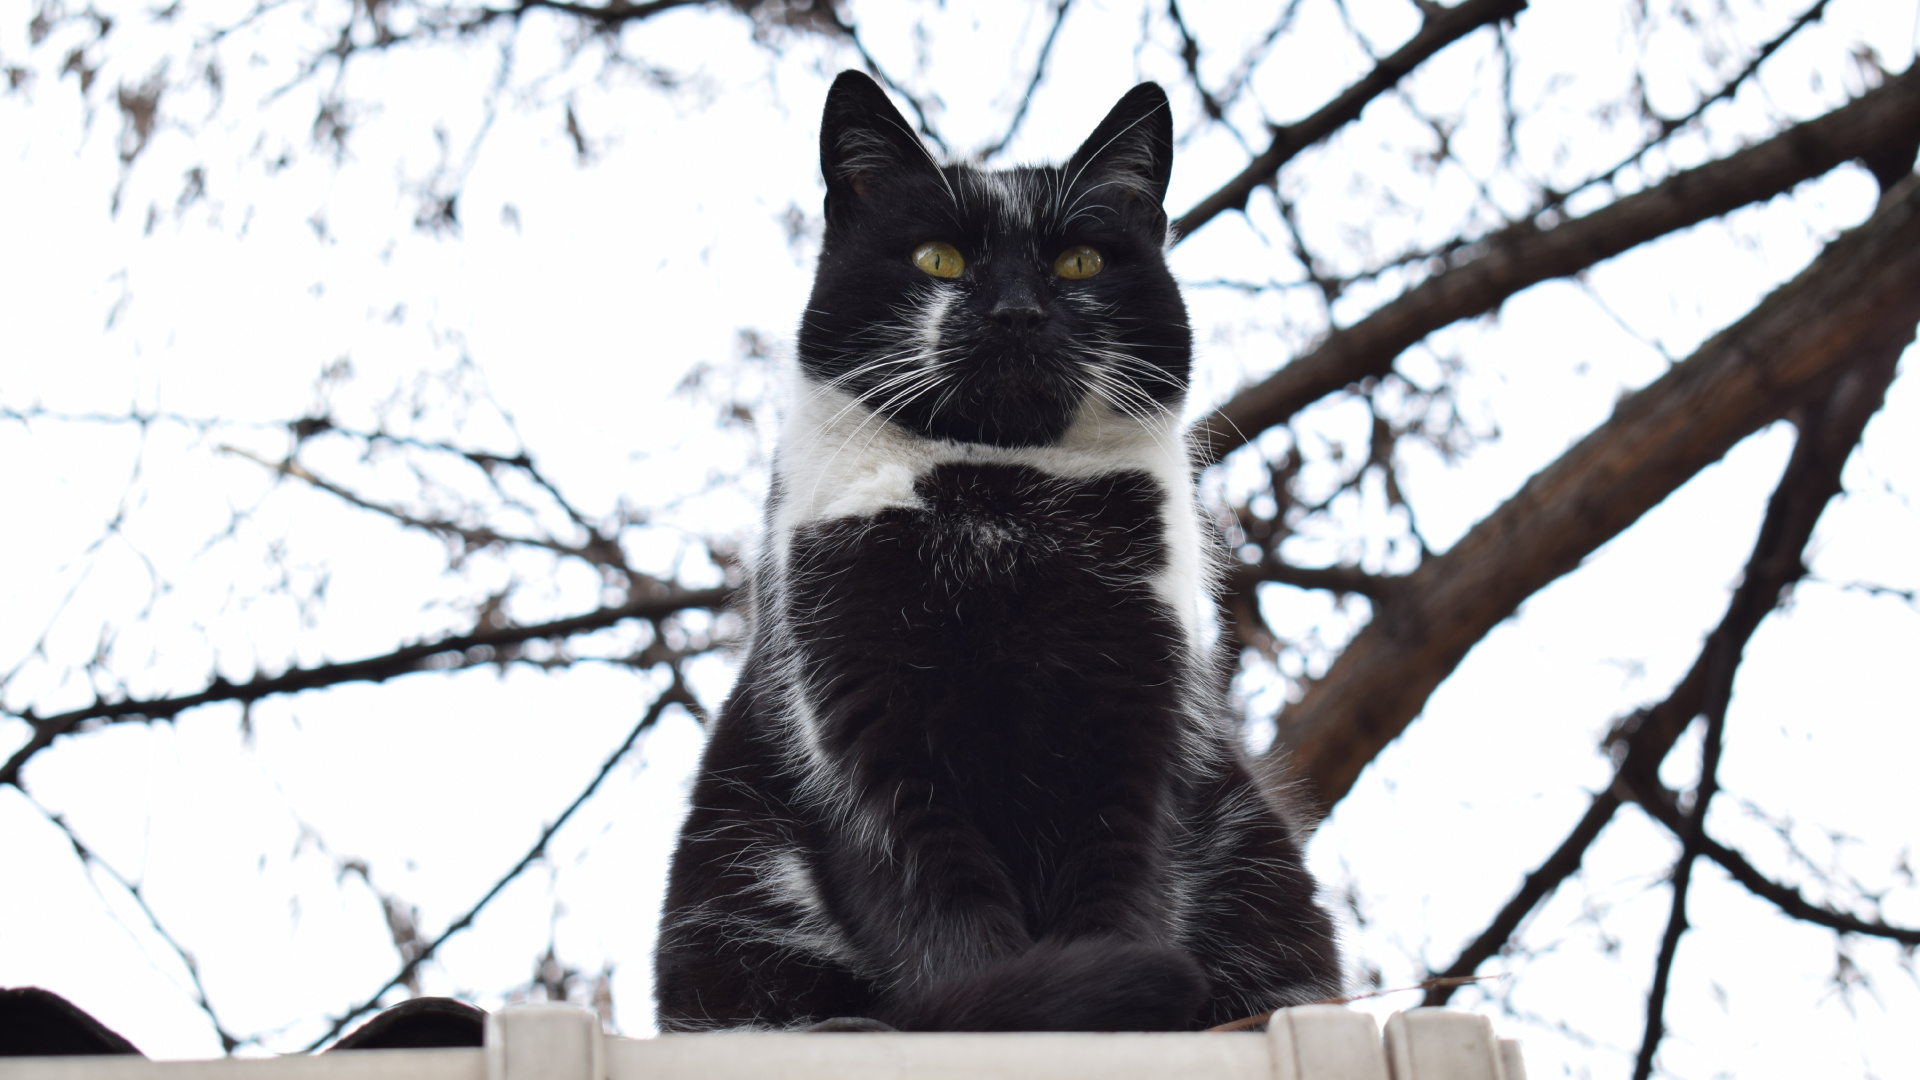 Tuxedo Cat on Brown Wooden Fence During Daytime. Wallpaper in 1920x1080 Resolution